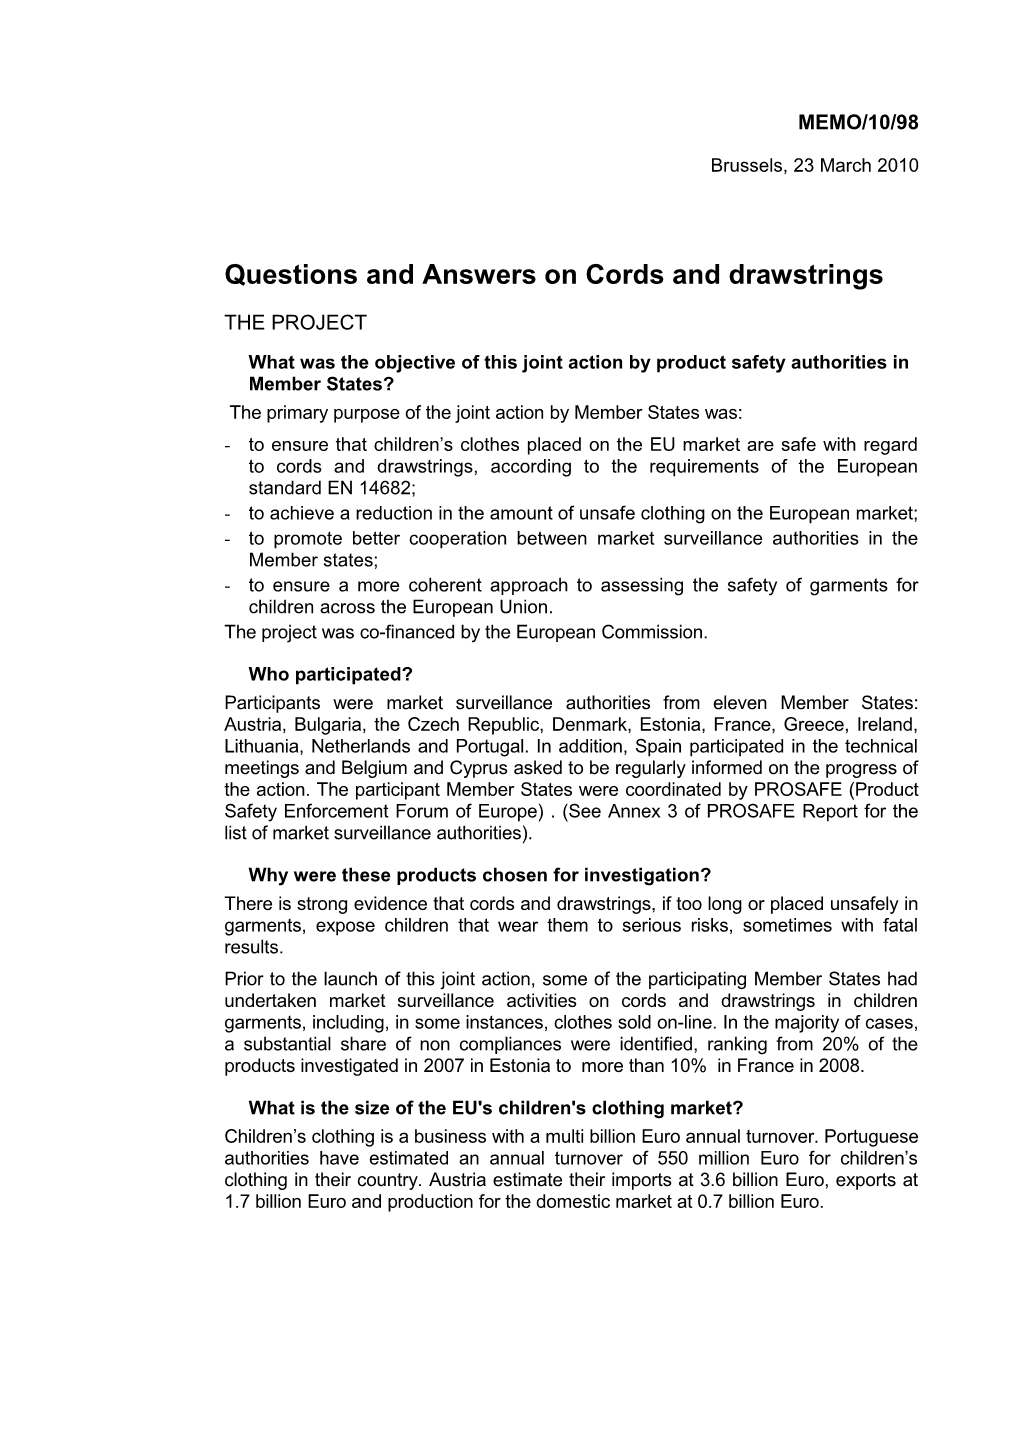 Questions and Answers on Cords and Drawstrings